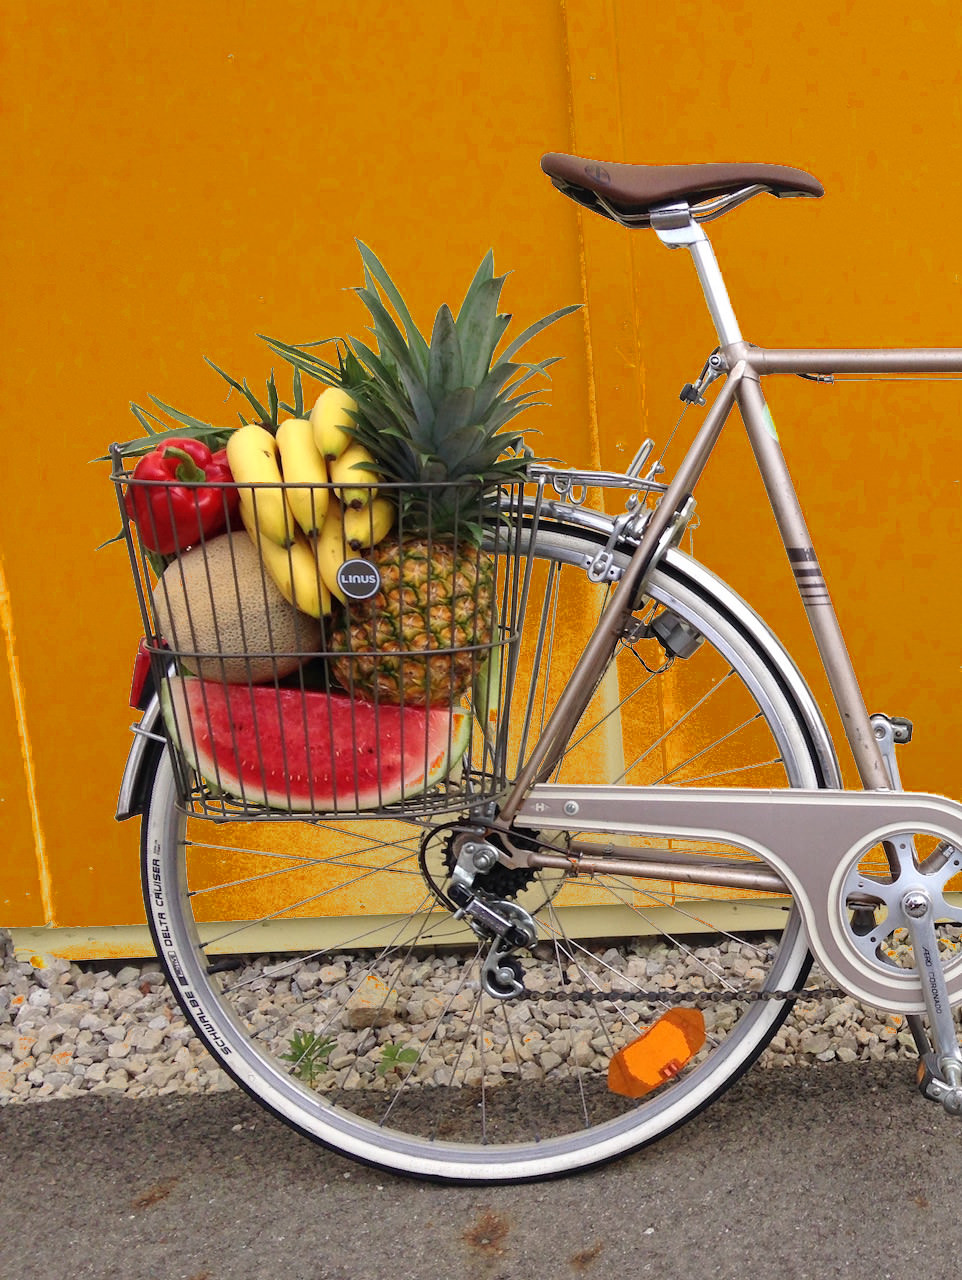 Vegan Grocery Shopping by Bicycle